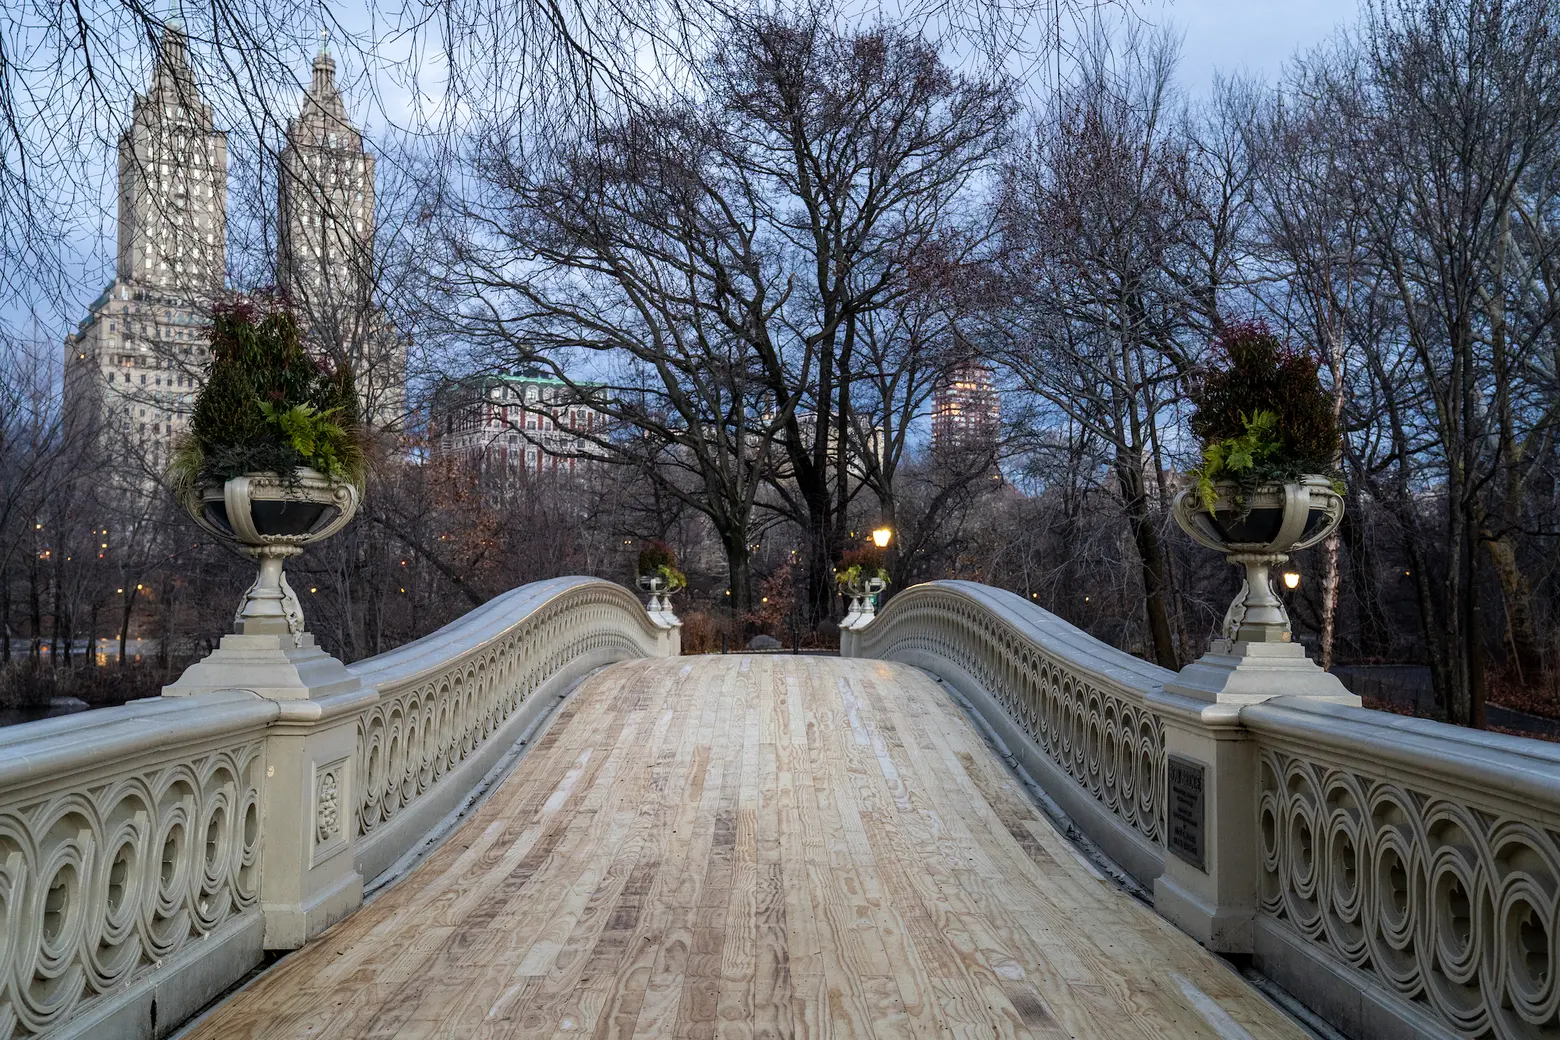 Central Park’s Bow Bridge reopens with new wood decking